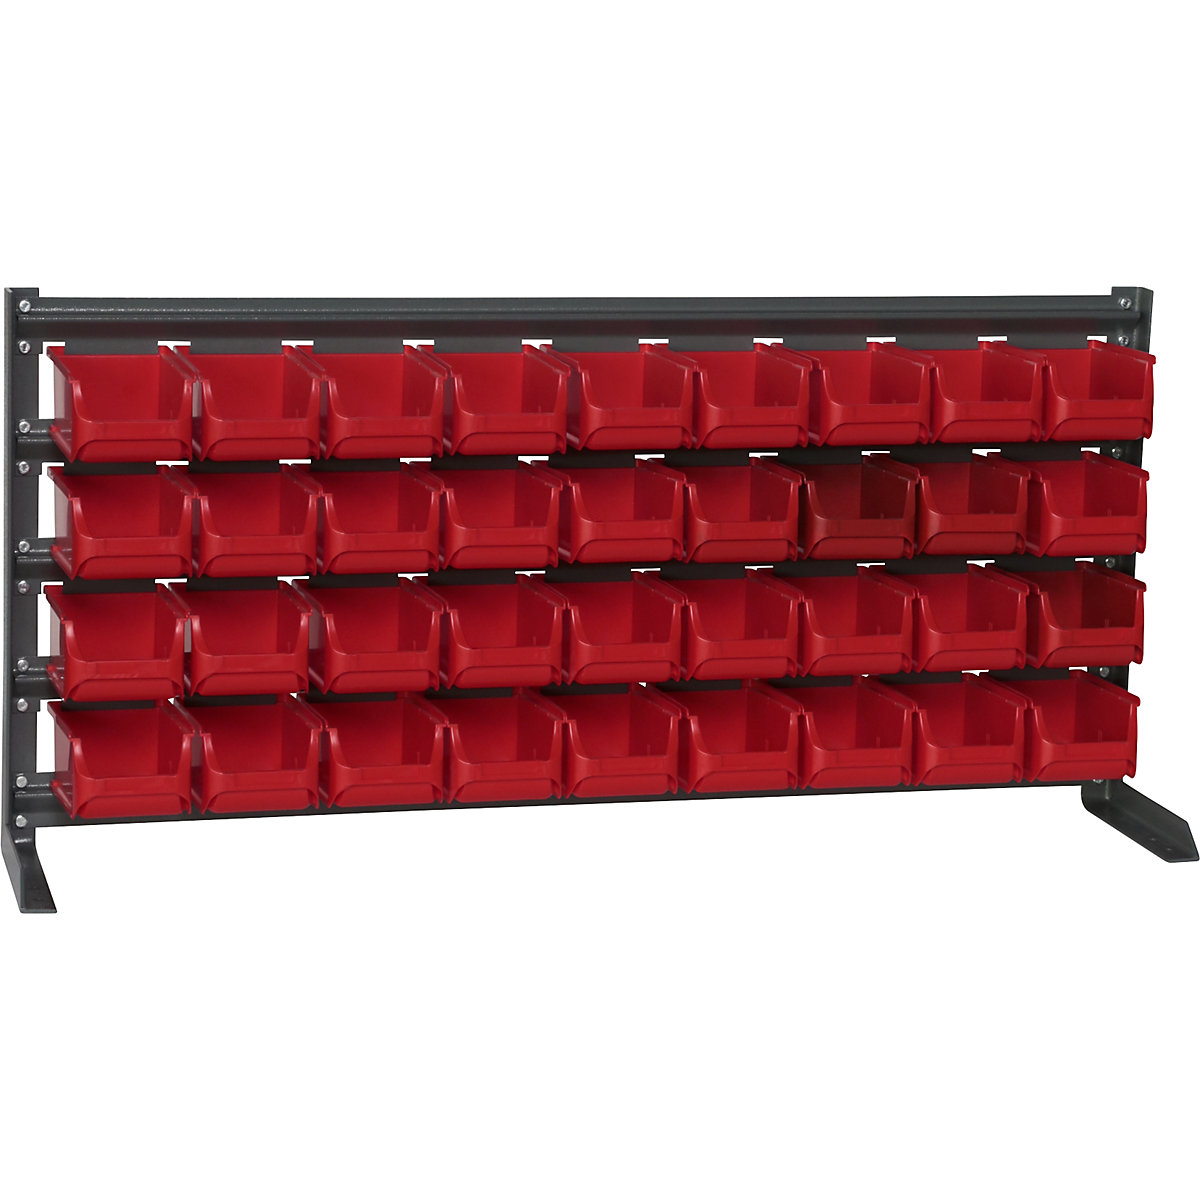 Small parts shelf unit, width 1020 mm: with open fronted storage bins